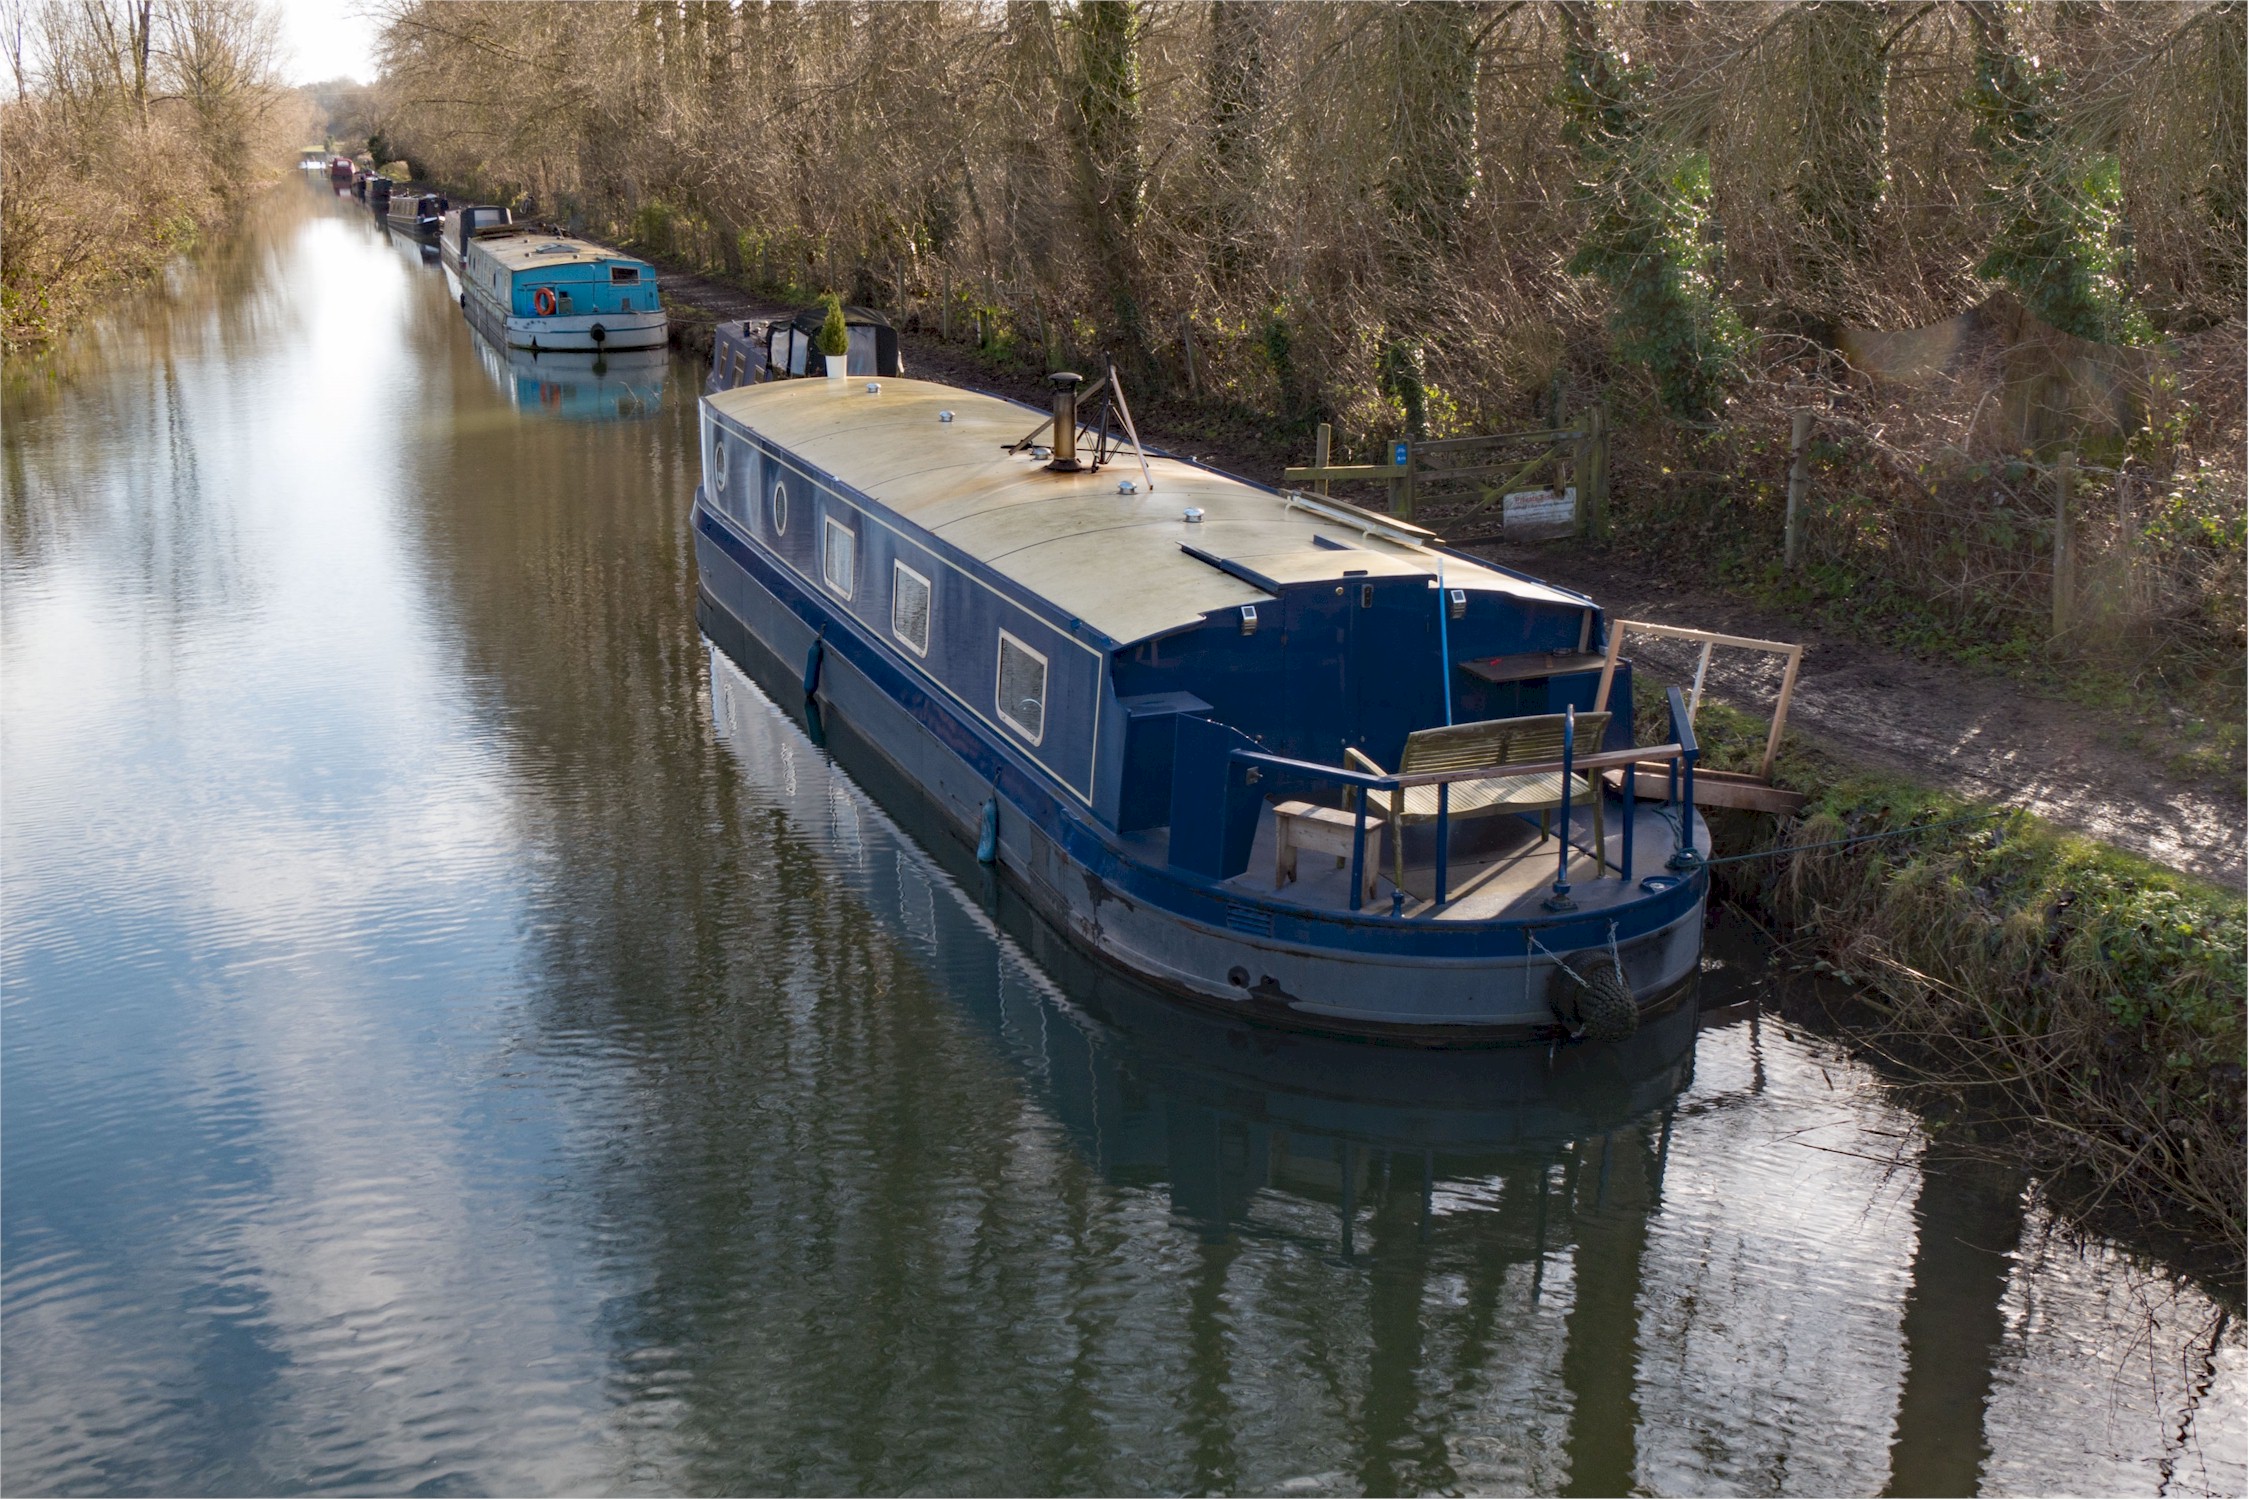  Houseboats on the Kennet and Avon canal